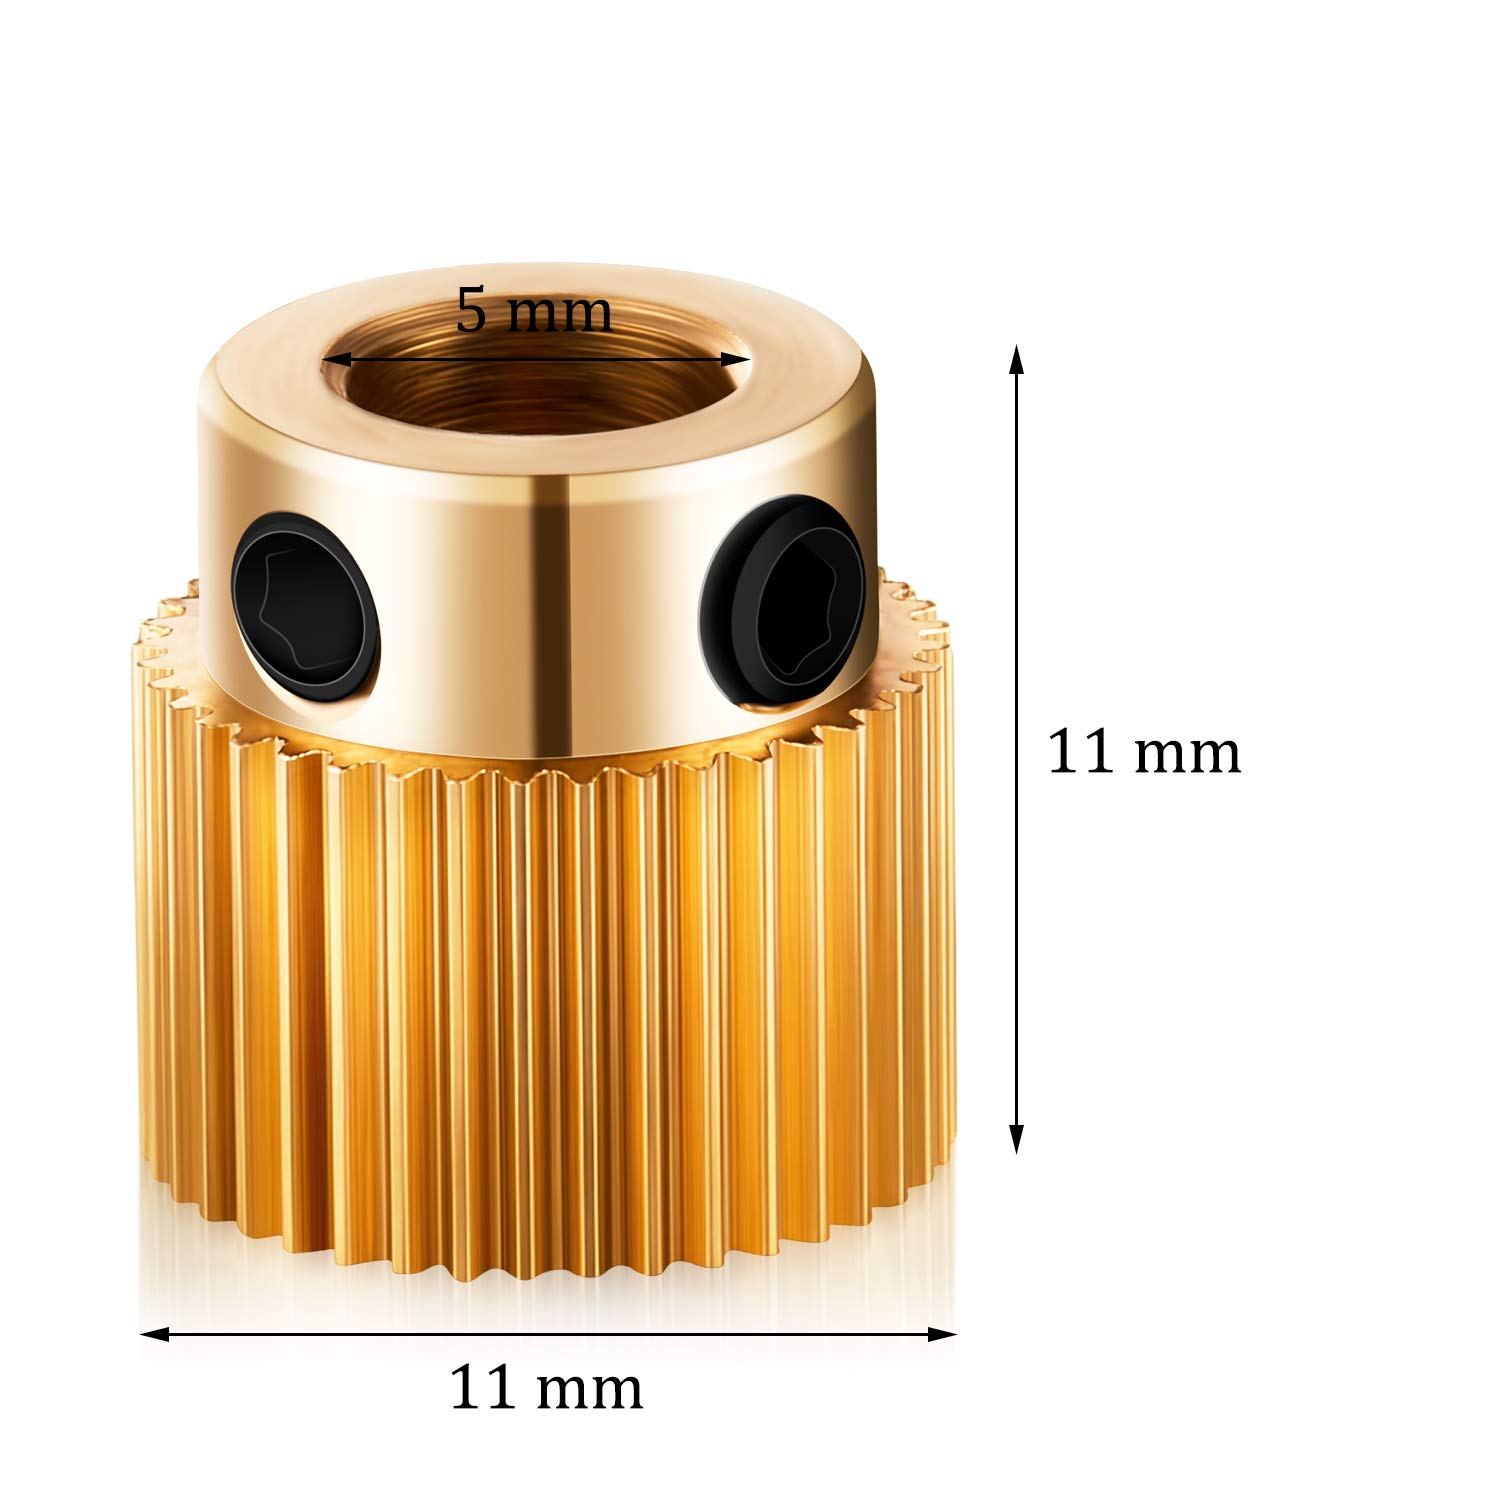 extruder-wheel-3d-printer-parts-drive-gear-brass-extruder-wheel-gear-compatible-with-cr-10-cr-10s-s4-s5-ender-3-ender-3-1-4 Extruder Wheel 3D Printer Parts Review